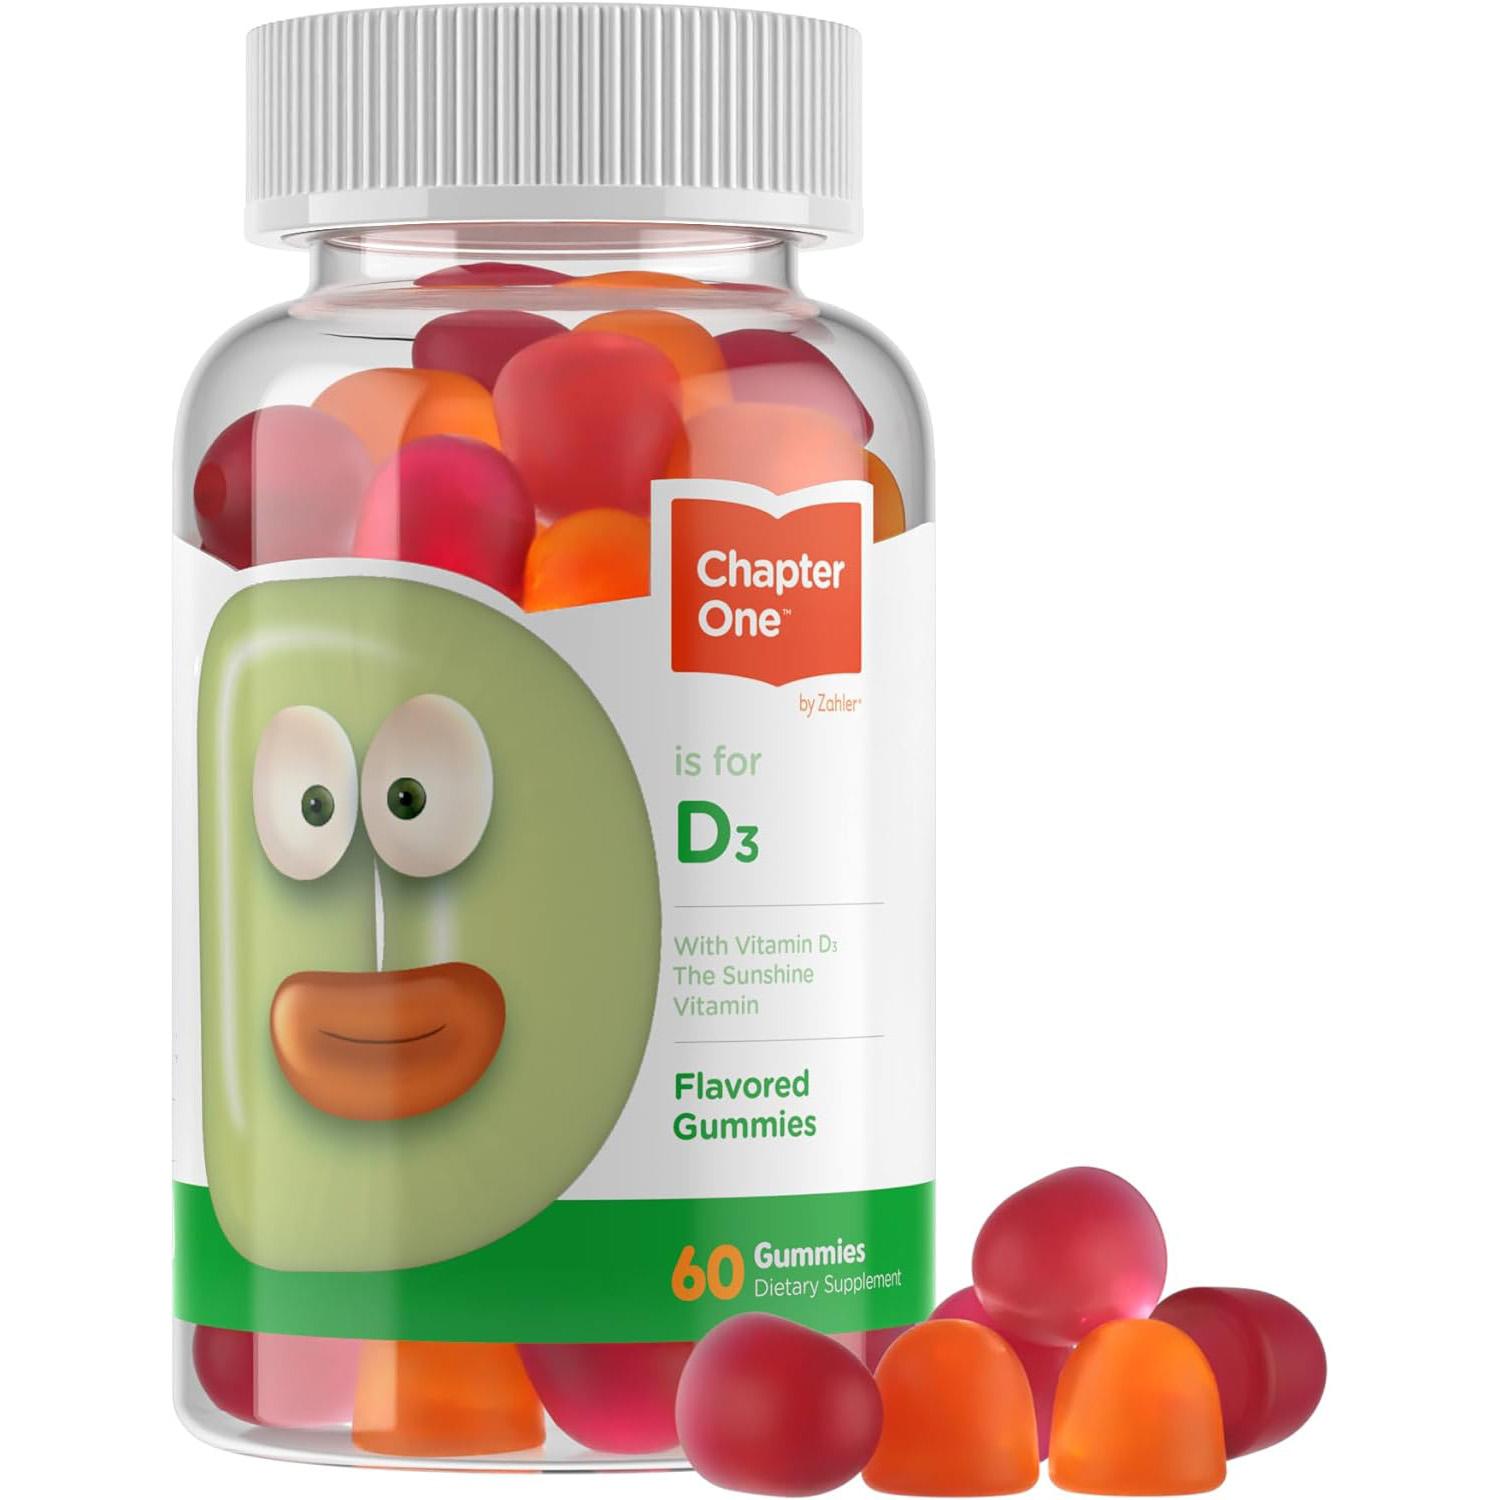 Zahler Chapter One Vitamin D3 1000 IU Gummies 60 Pack for $1.98 Shipped